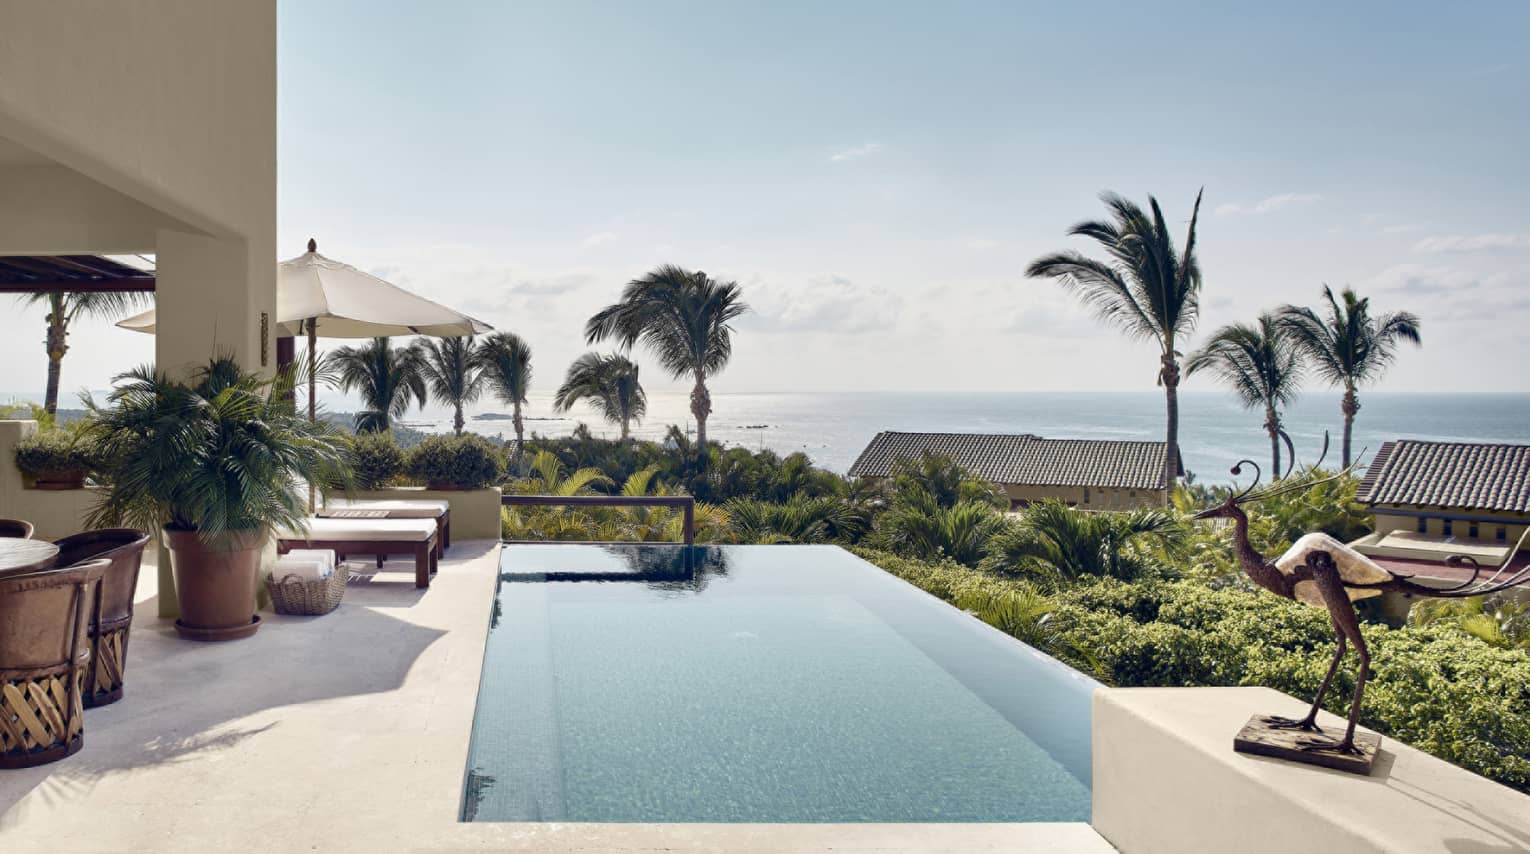 Private ocean-view terrace with pool